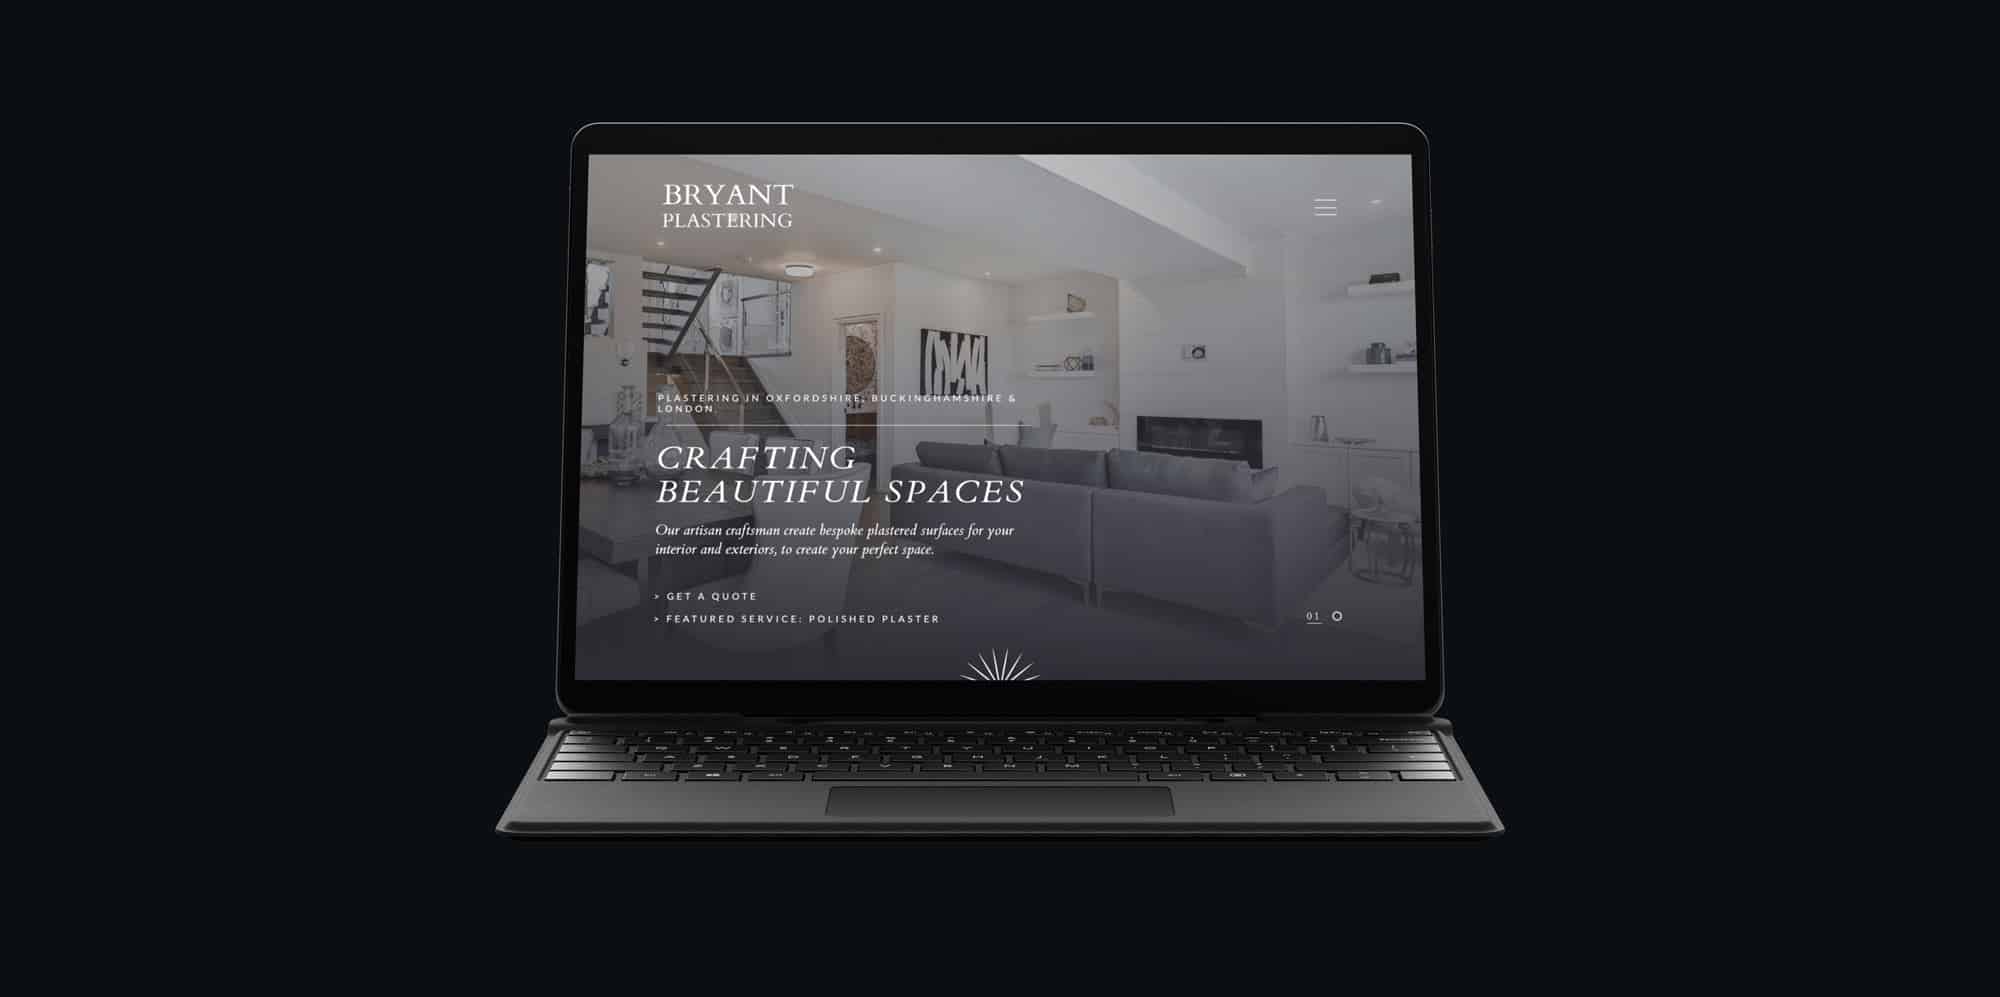 The Bryant Plastering website home page displayed on a Surface laptop